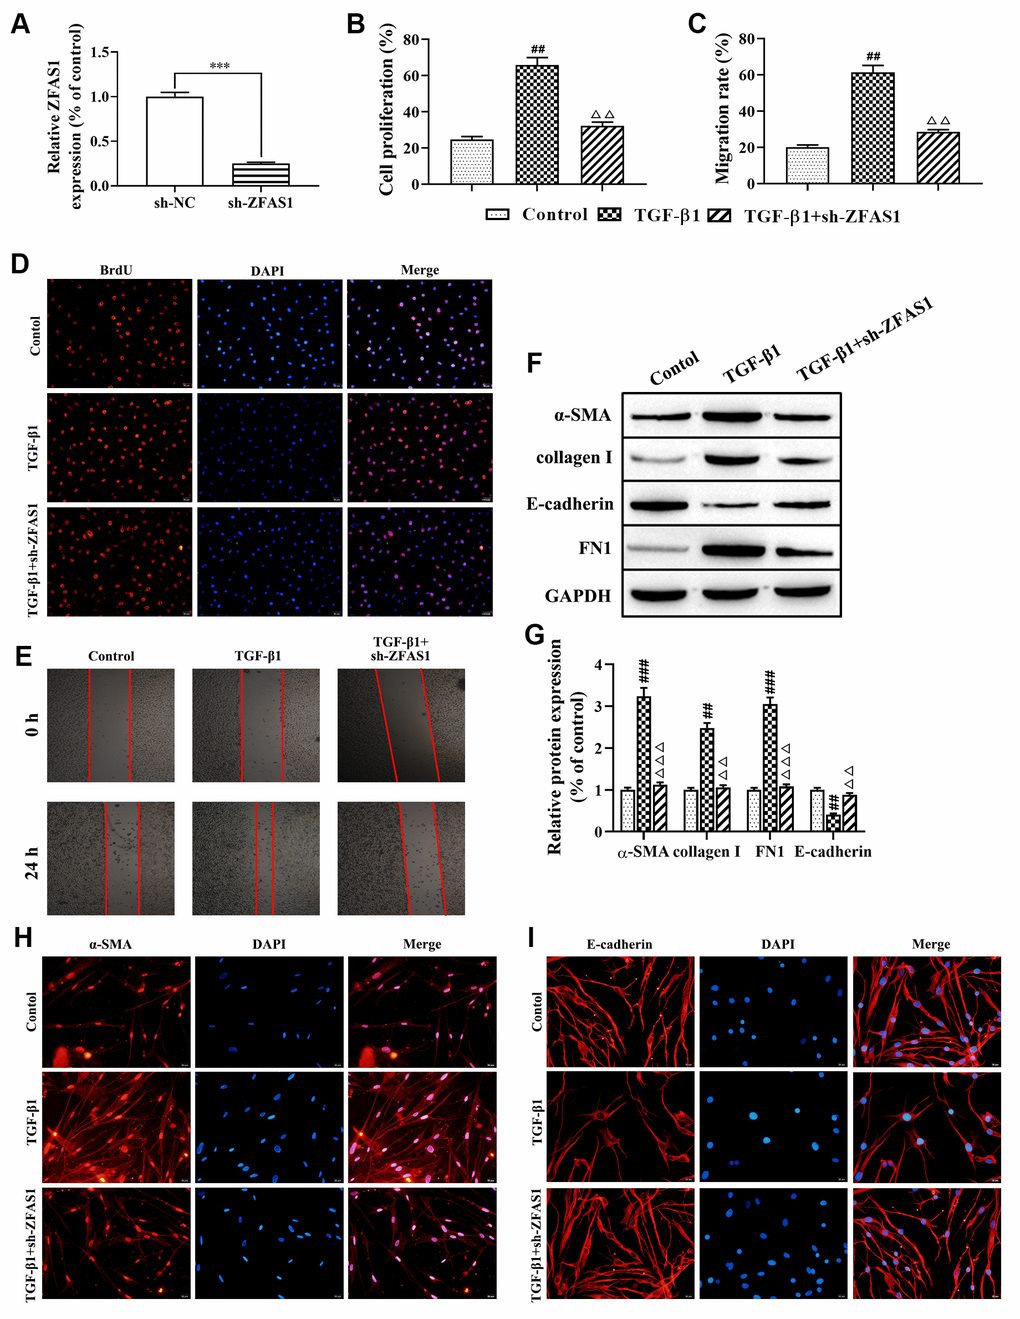 Knockdown of lncRNA ZFAS1 inhibits the FMT process in TGF-β1-induced HFL1 cells. (A) The expression of lncRNA ZFAS1 in HFL1 cells transfected with lncRNA ZFAS1 shRNA was determined by RT-qPCR; (B–D) BrdU staining was applied to test cell viability; (C–E) The migration ability of HFL1 cells was measured by wound healing assay; (F, G) Western blot was performed to detect the expression levels of E-cadherin, collagen I, FN1 and the FMT marker α-SMA; (H, I) Immunofluorescence staining was applied to evaluate the expression of α-SMA and E-cadherin in HFL1 cells. ***P##P###PΔΔPΔΔΔP